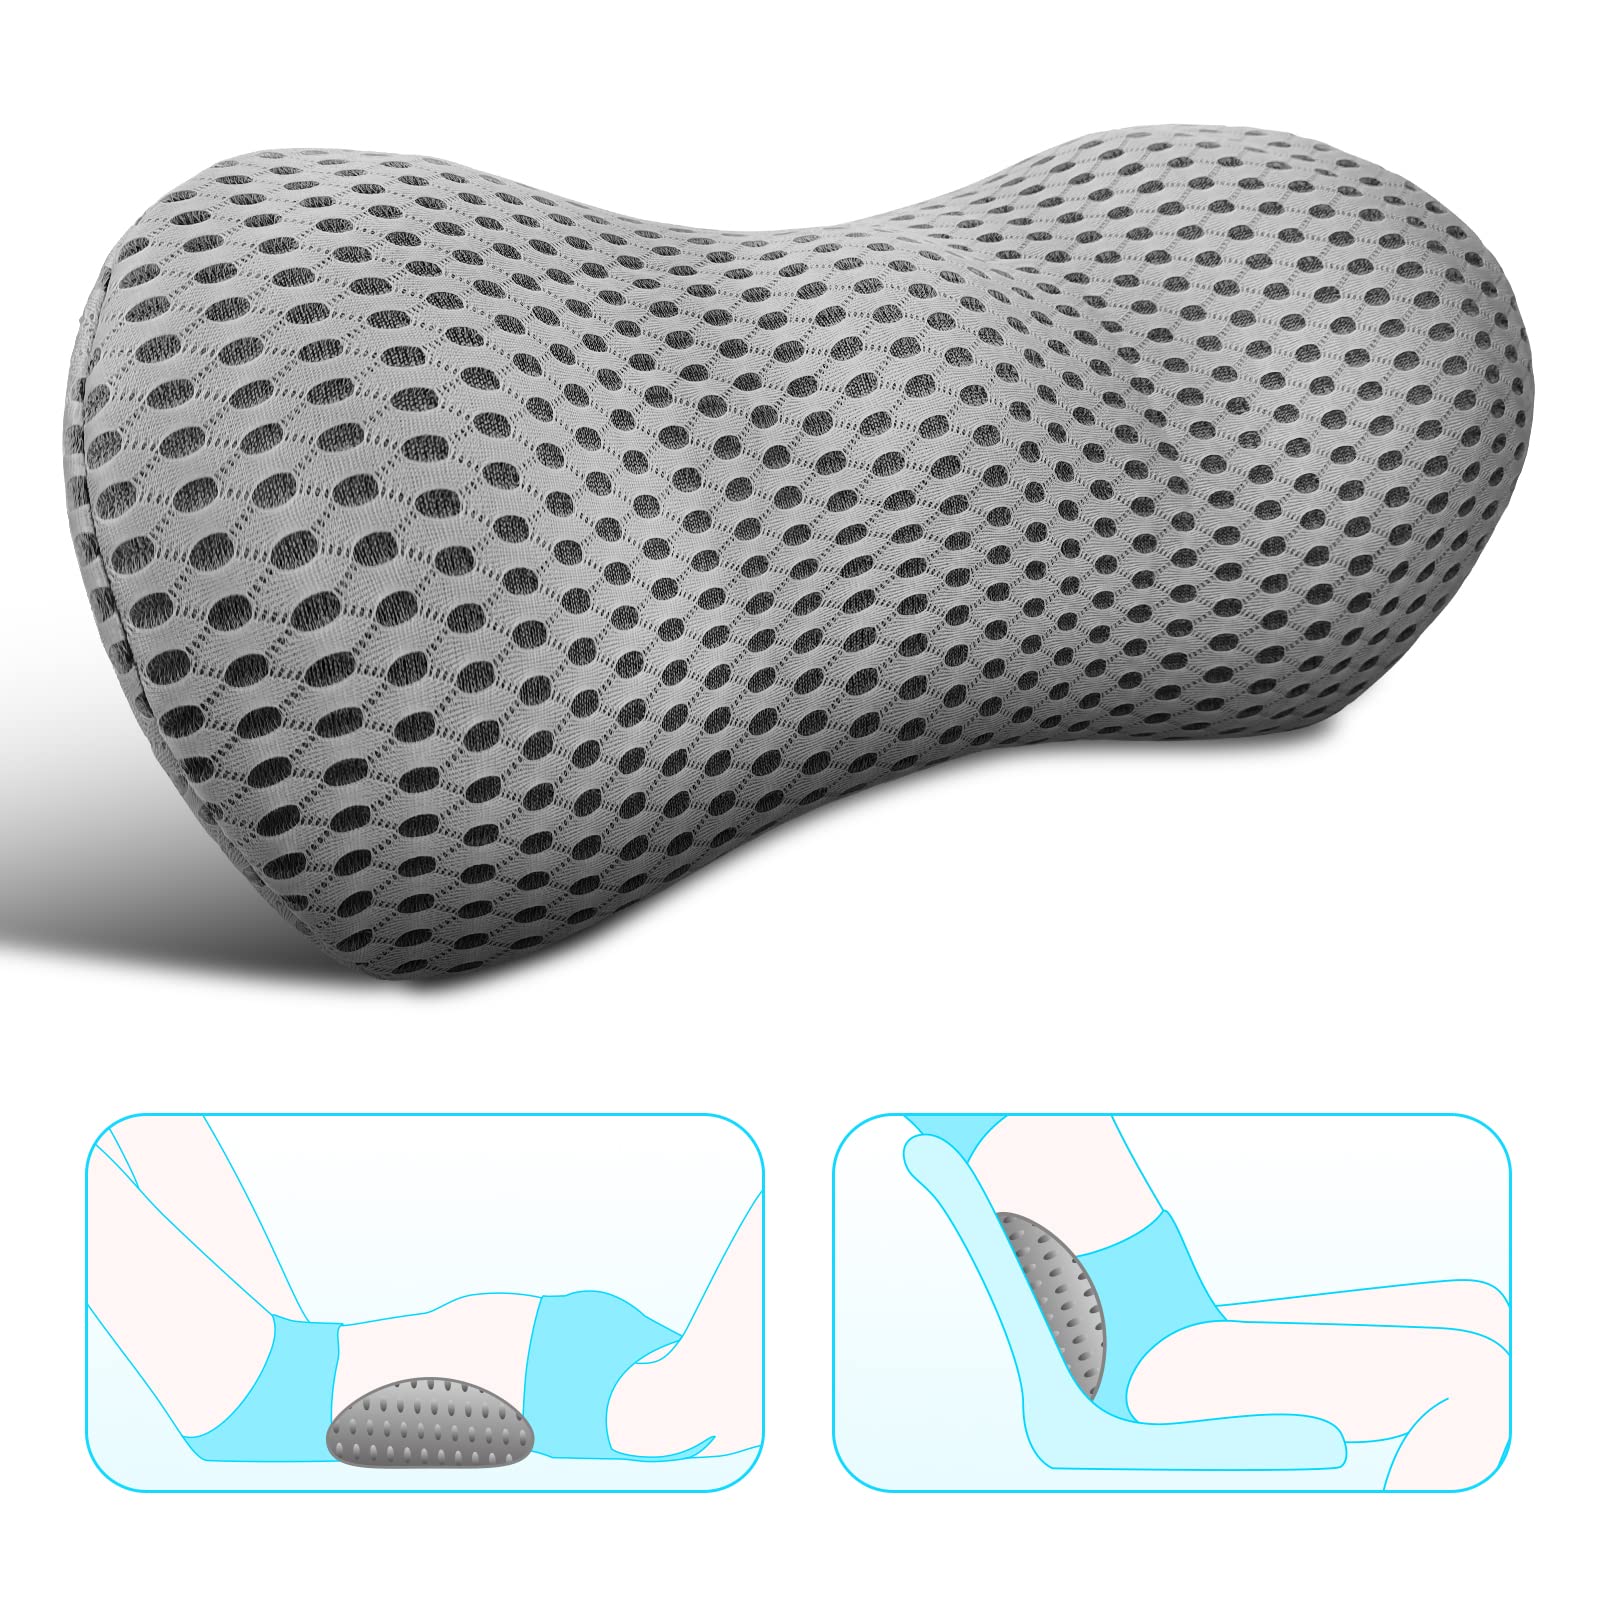 Lumbar Support Mesh Back Support Cushion for Car Seat, Office Chair, Gaming  Chair (Black, 2 Pack)